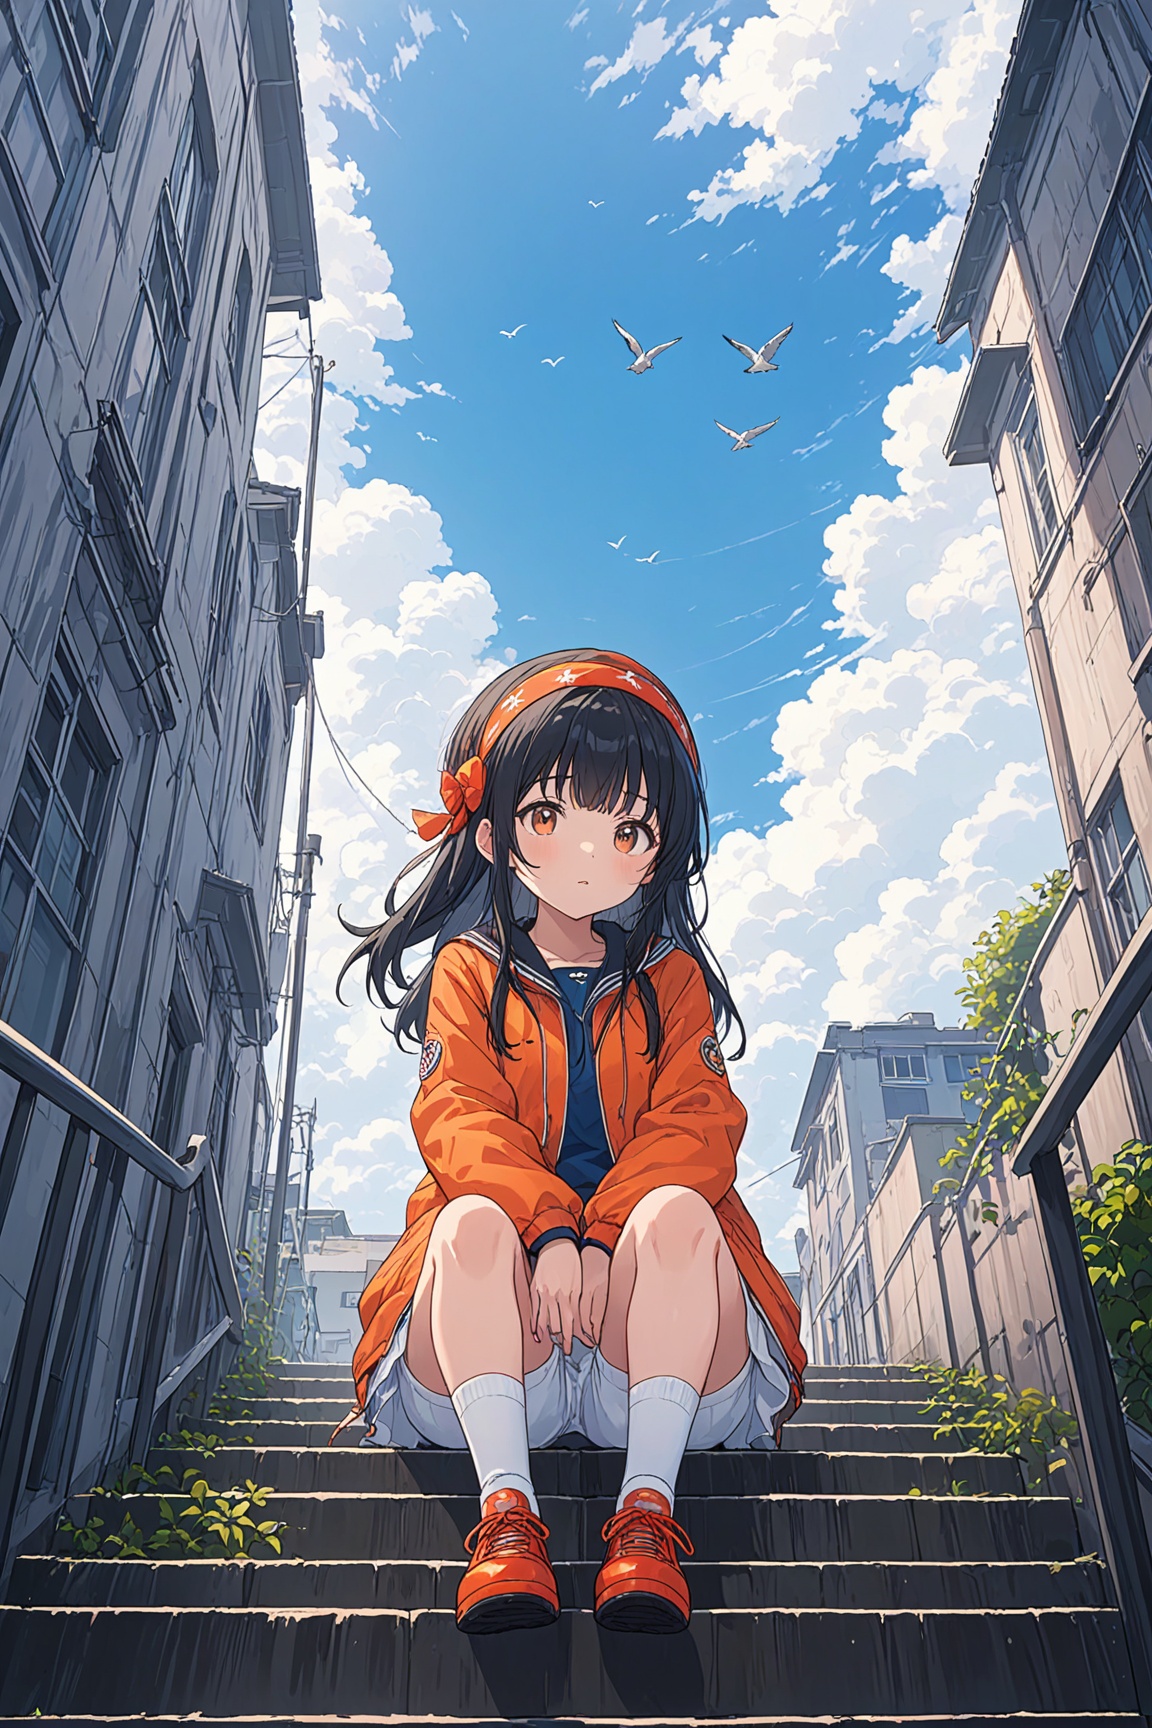 ultra-detailed,(best quality),((masterpiece)),(highres),original,extremely detailed 8K wallpaper,(an extremely delicate and beautiful),anime,\\,BREAK1girl,orange shoes,solo,sitting,sky,clouds,outdoors,black hair,bird,upward view,blue sky,white socks,daytime,orange jacket,building,long sleeves,leaves,long hair,stairs,red headband,pump Rope,headband,bangs,cloudy sky,from_below,wide_shot,